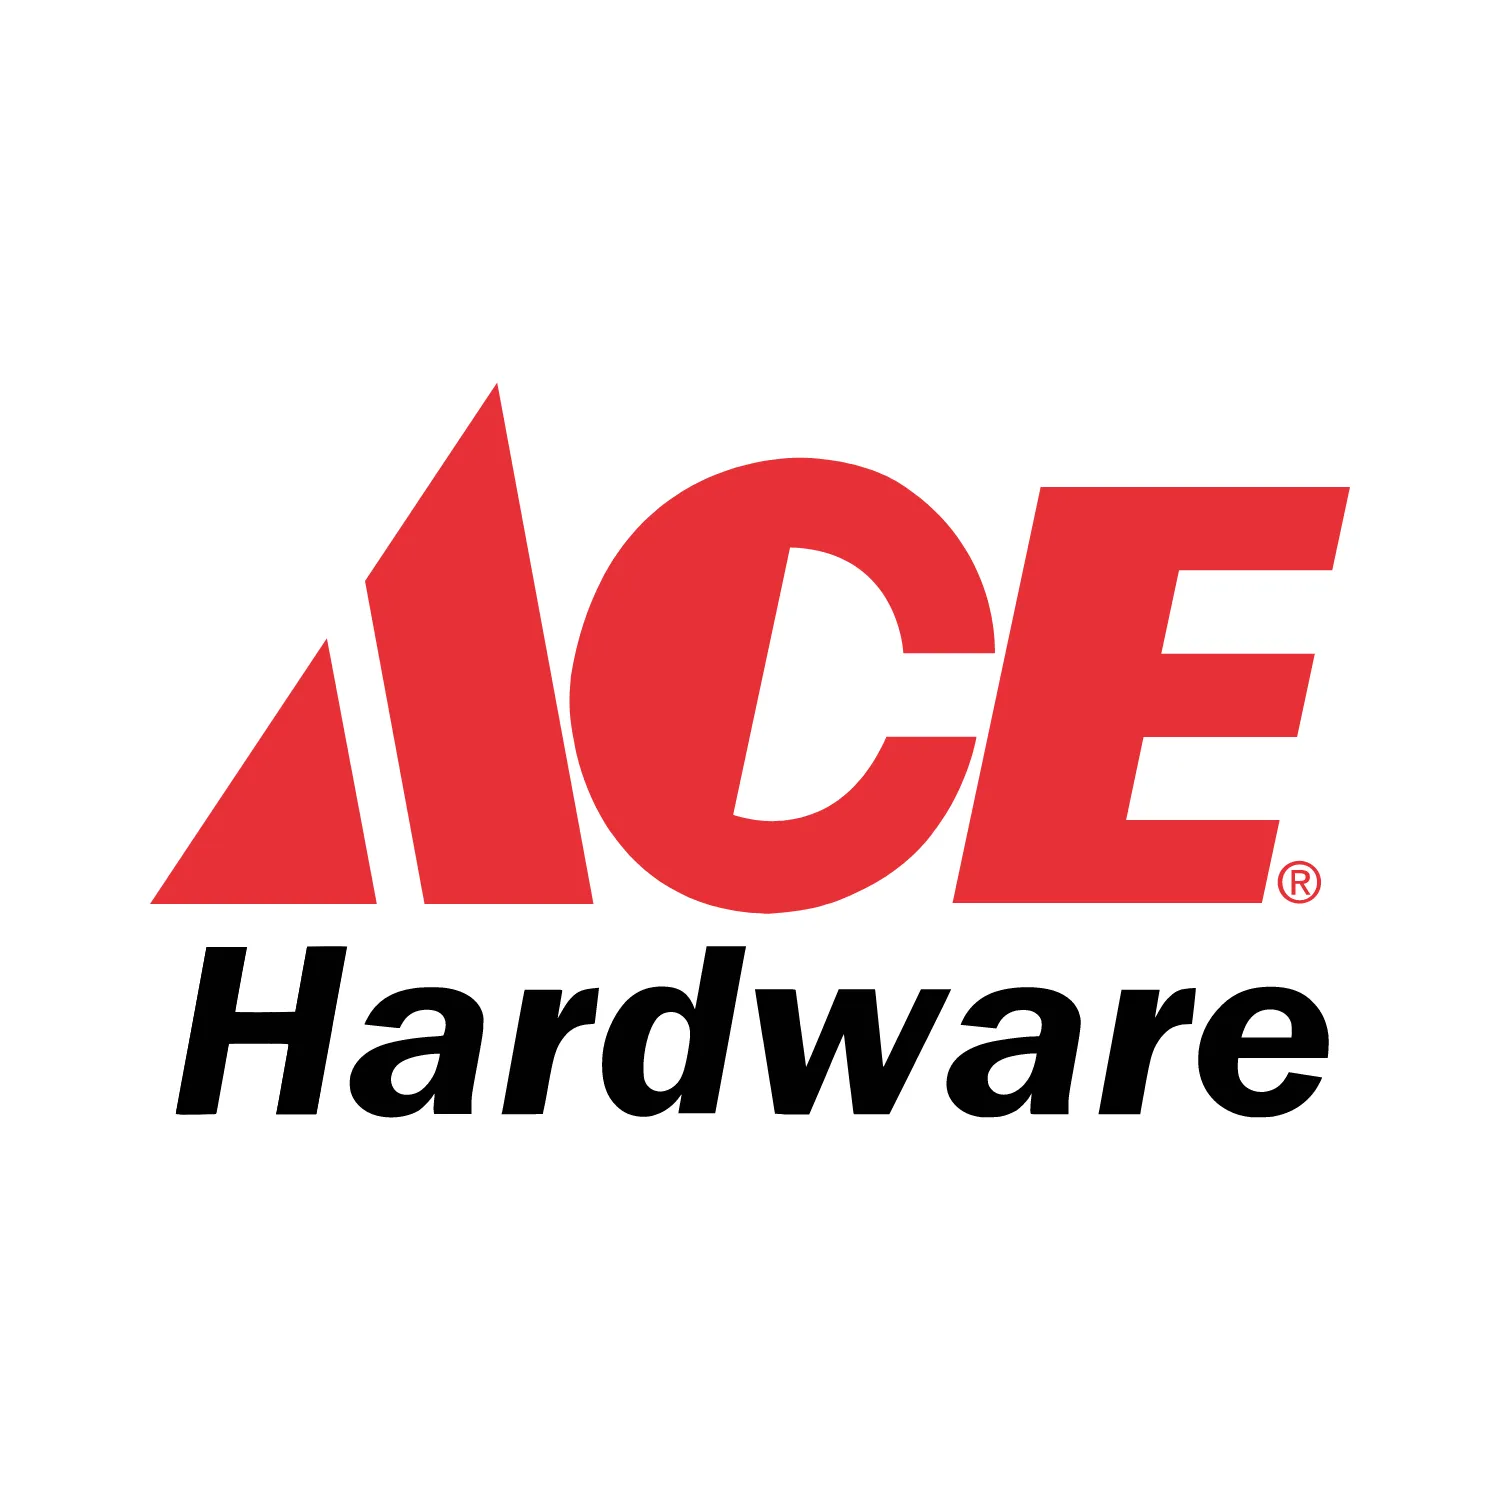 Database of Ace Hardware Locations in the United States